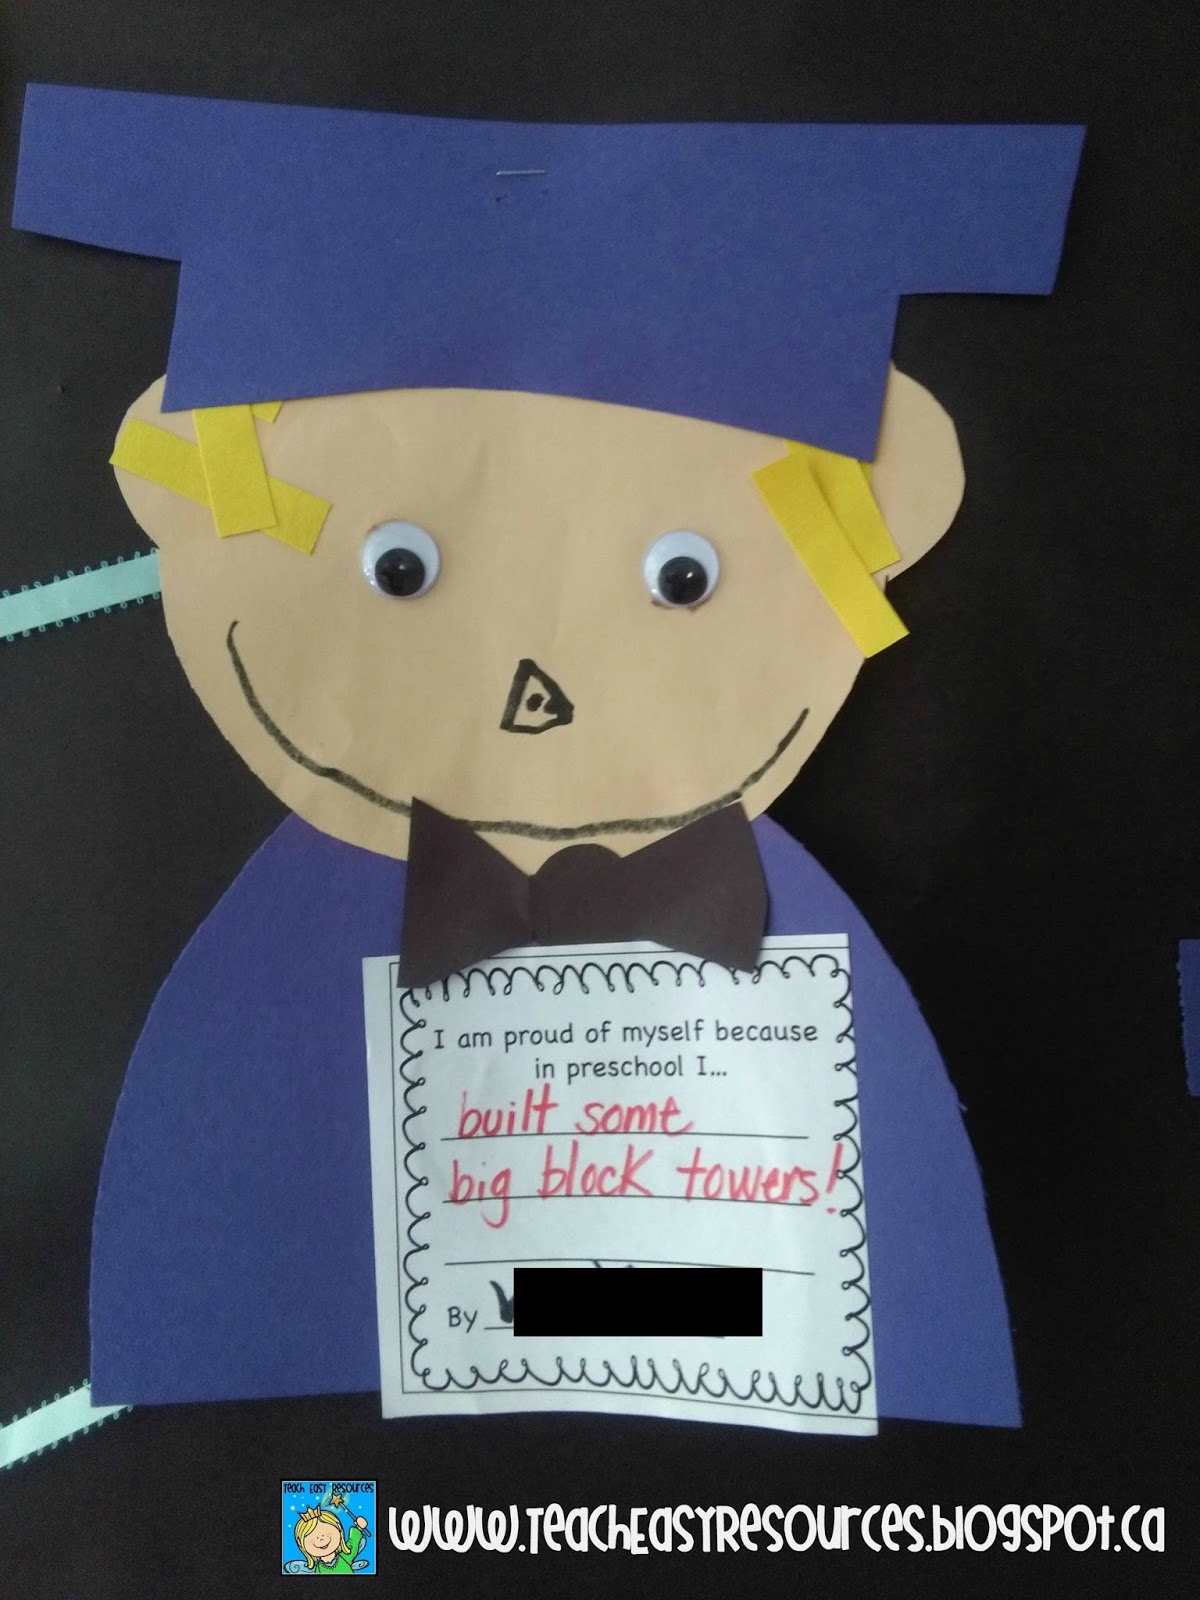 Teach Easy Resources: Graduation People Decorations for Preschool Plus a Free Printable